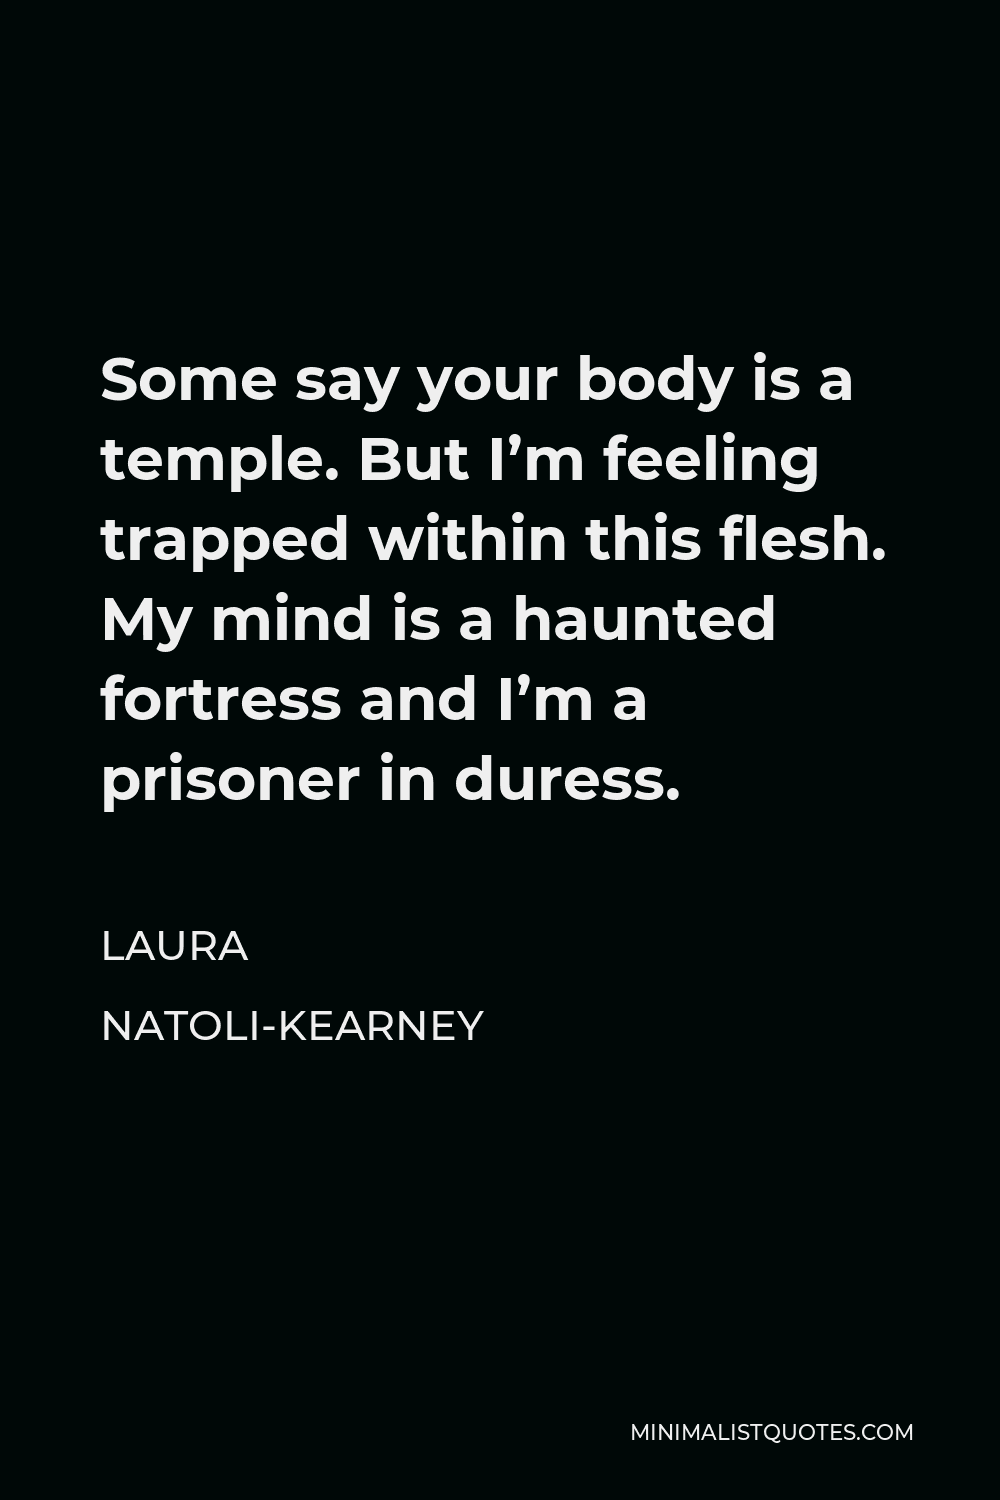 Laura Natoli-Kearney Quote - Some say your body is a temple. But I’m feeling trapped within this flesh. My mind is a haunted fortress and I’m a prisoner in duress.